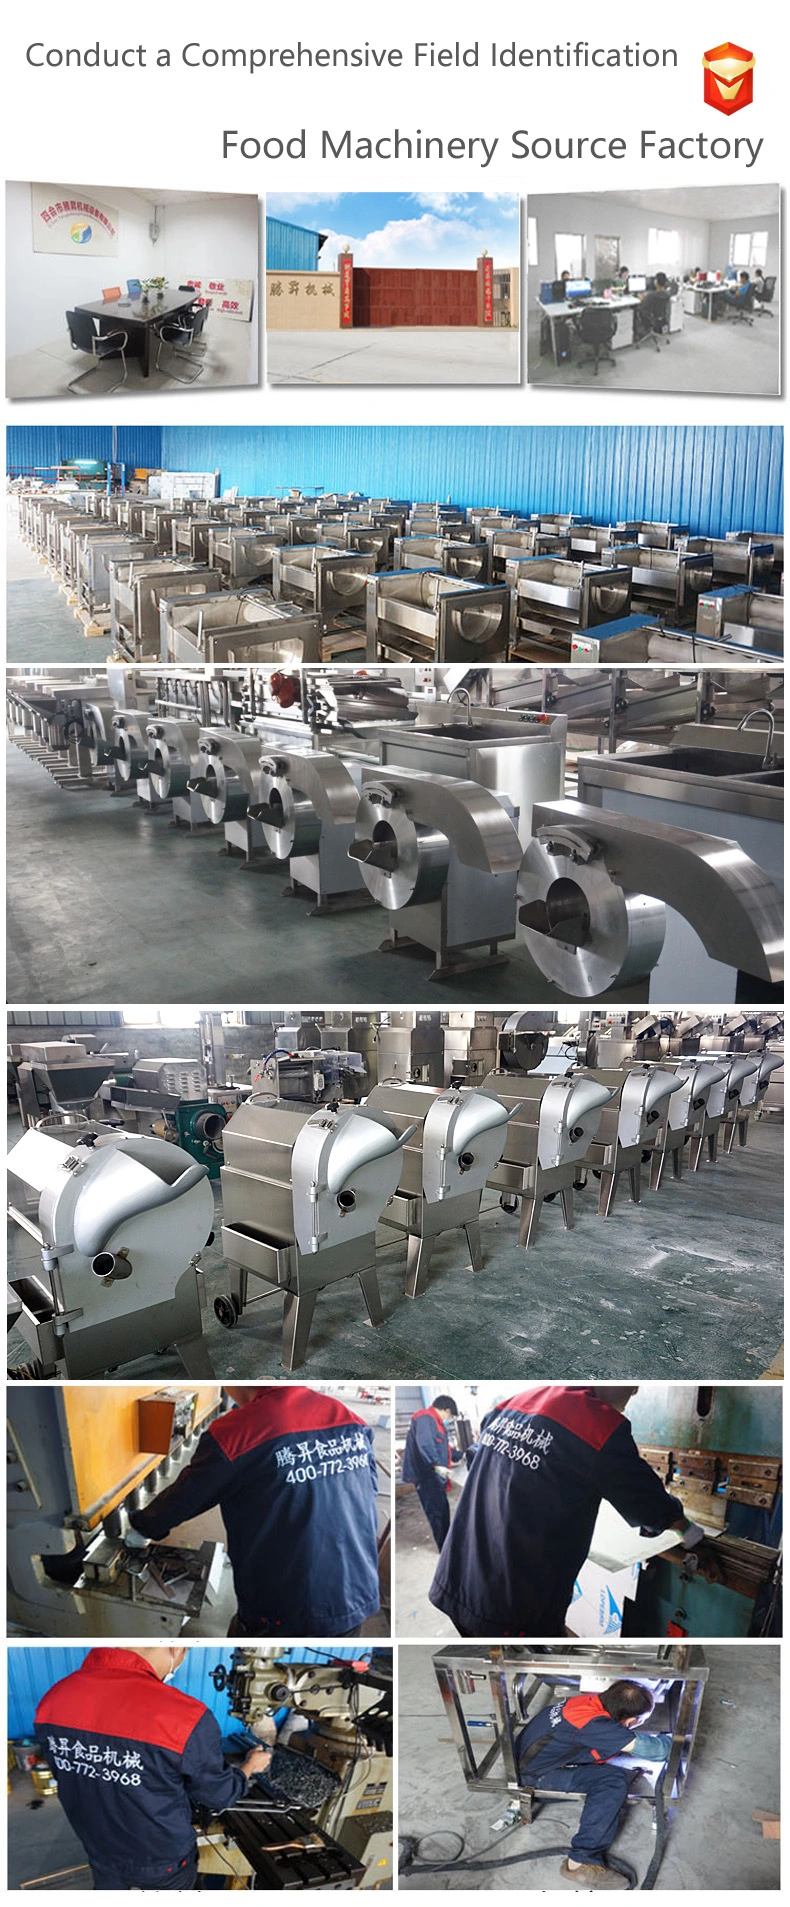 Food Processor Multi-Function Double - Ended Vegetable Cutting Machine Fruit and Vegetable Cutting Machinery (TS-Q118A)